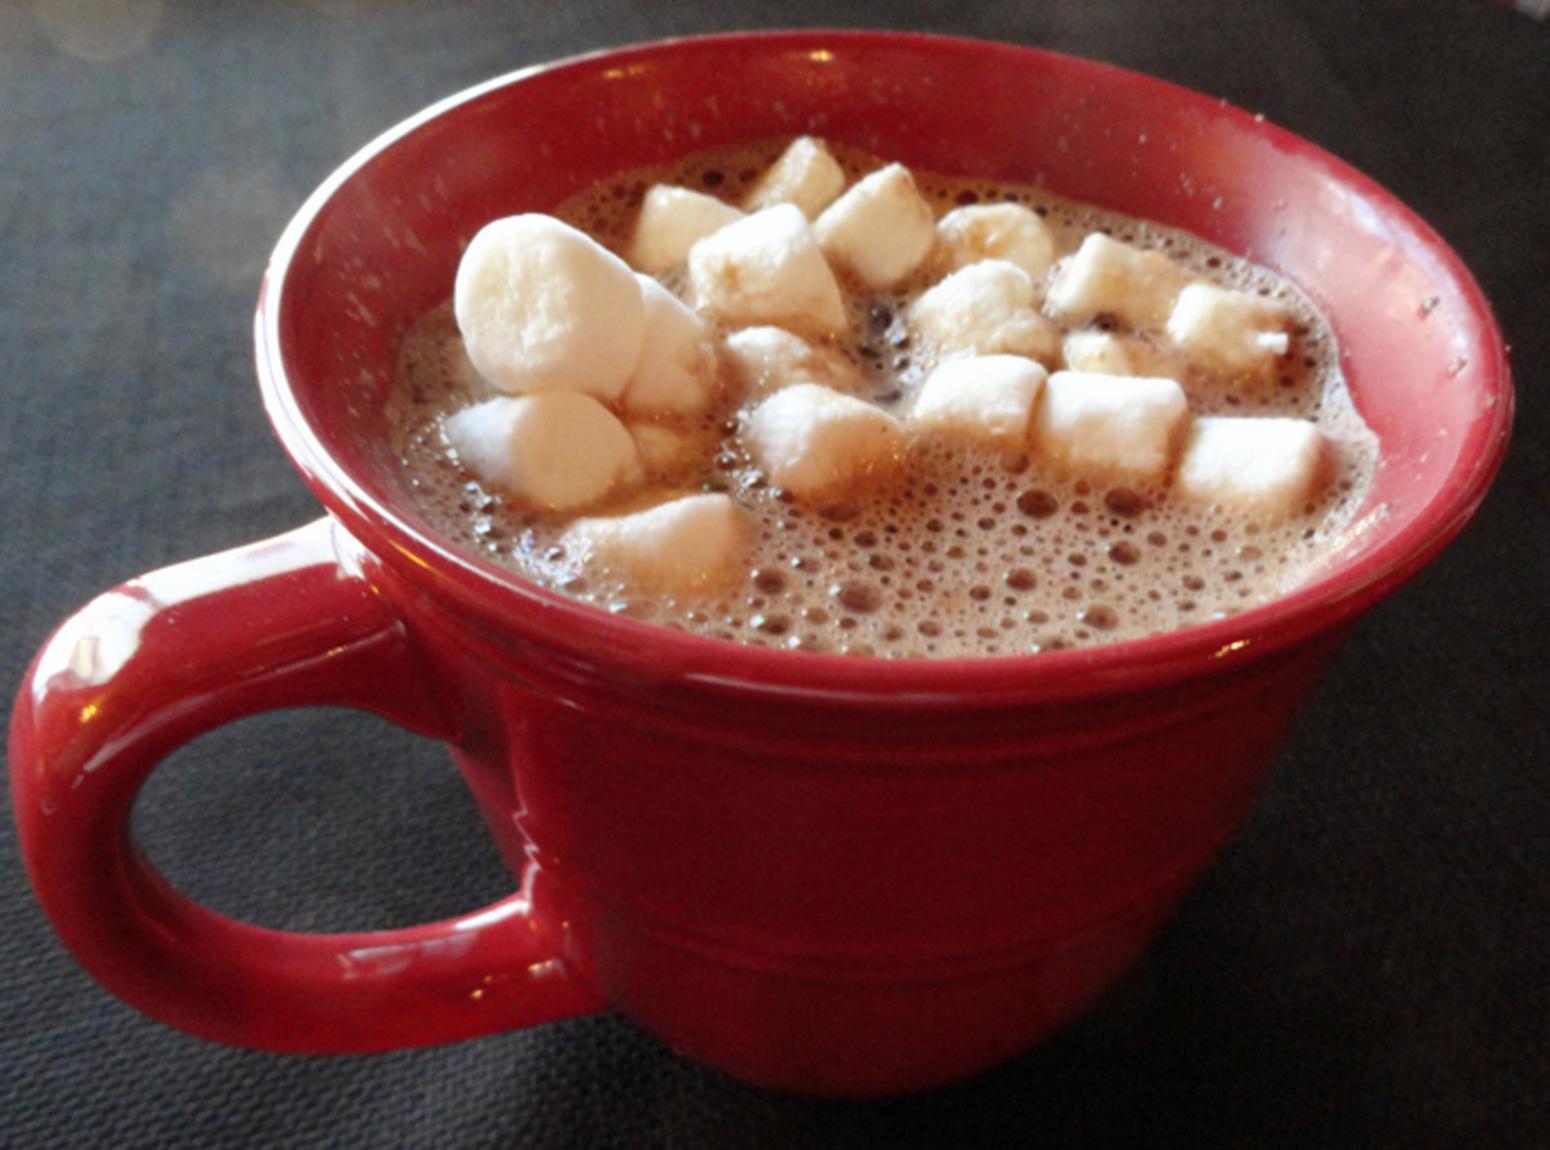 Hot Chocolate Fit For Wintry Fun!